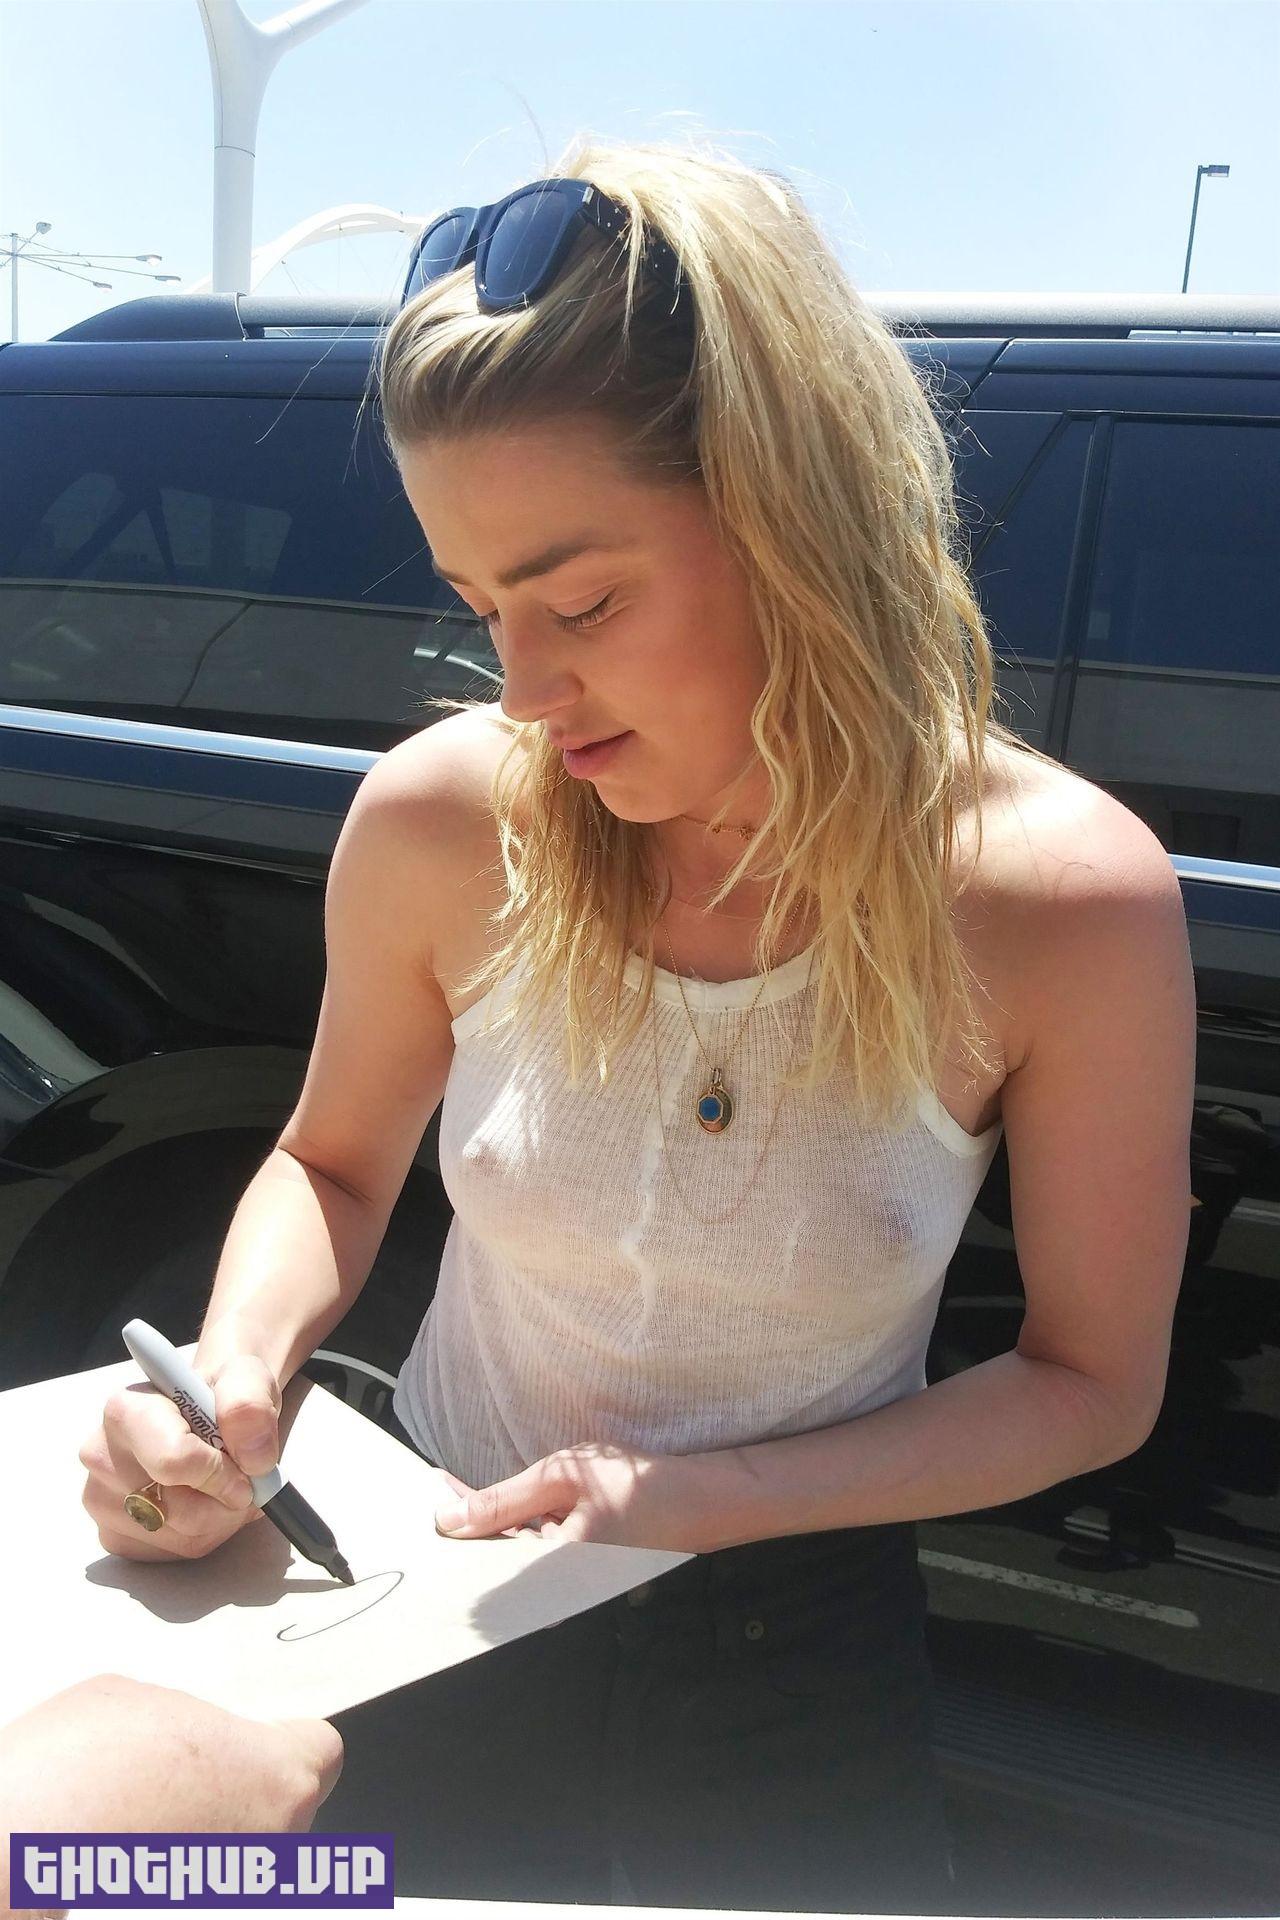 Amber Heard Signed Autographs Braless